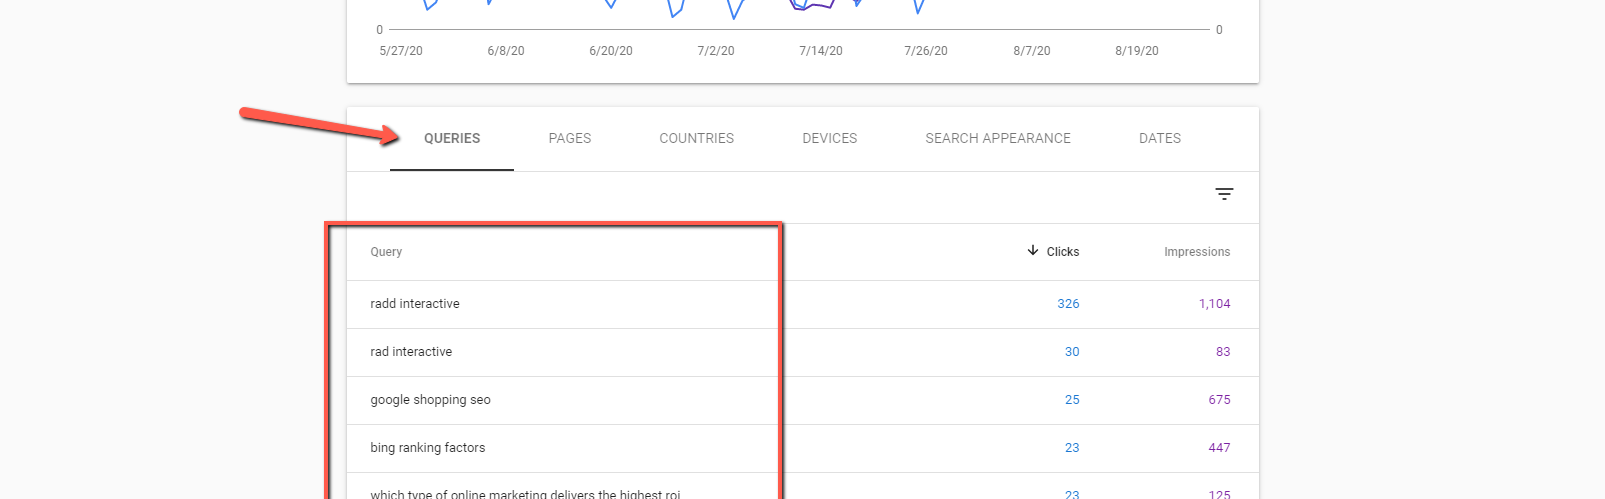 Keyword ranking positions shown in Search Console